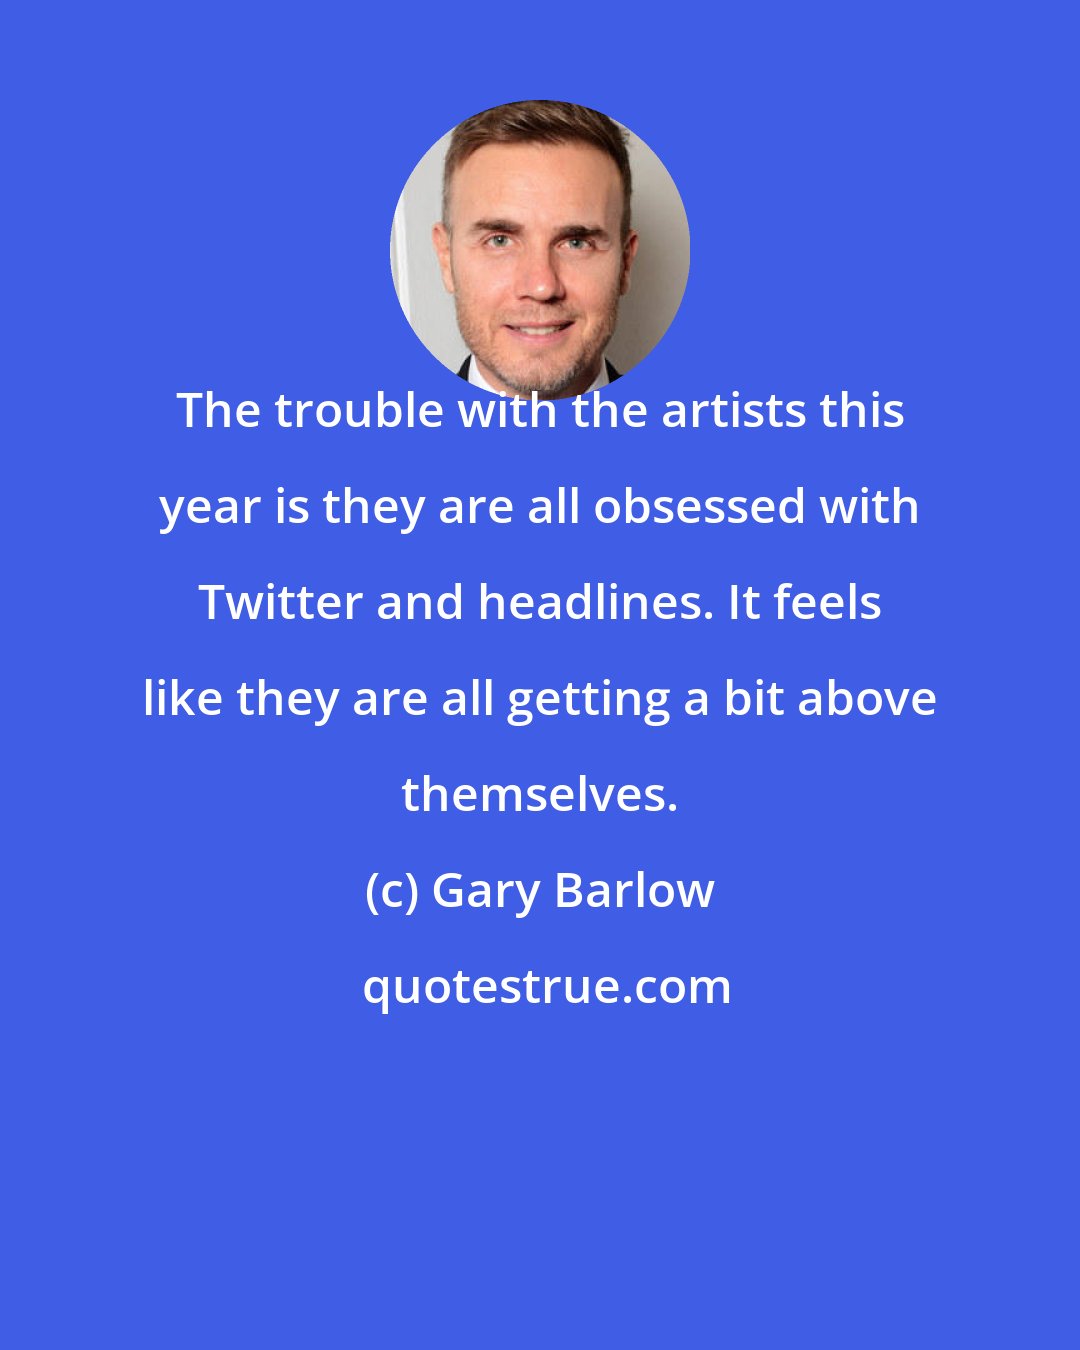 Gary Barlow: The trouble with the artists this year is they are all obsessed with Twitter and headlines. It feels like they are all getting a bit above themselves.